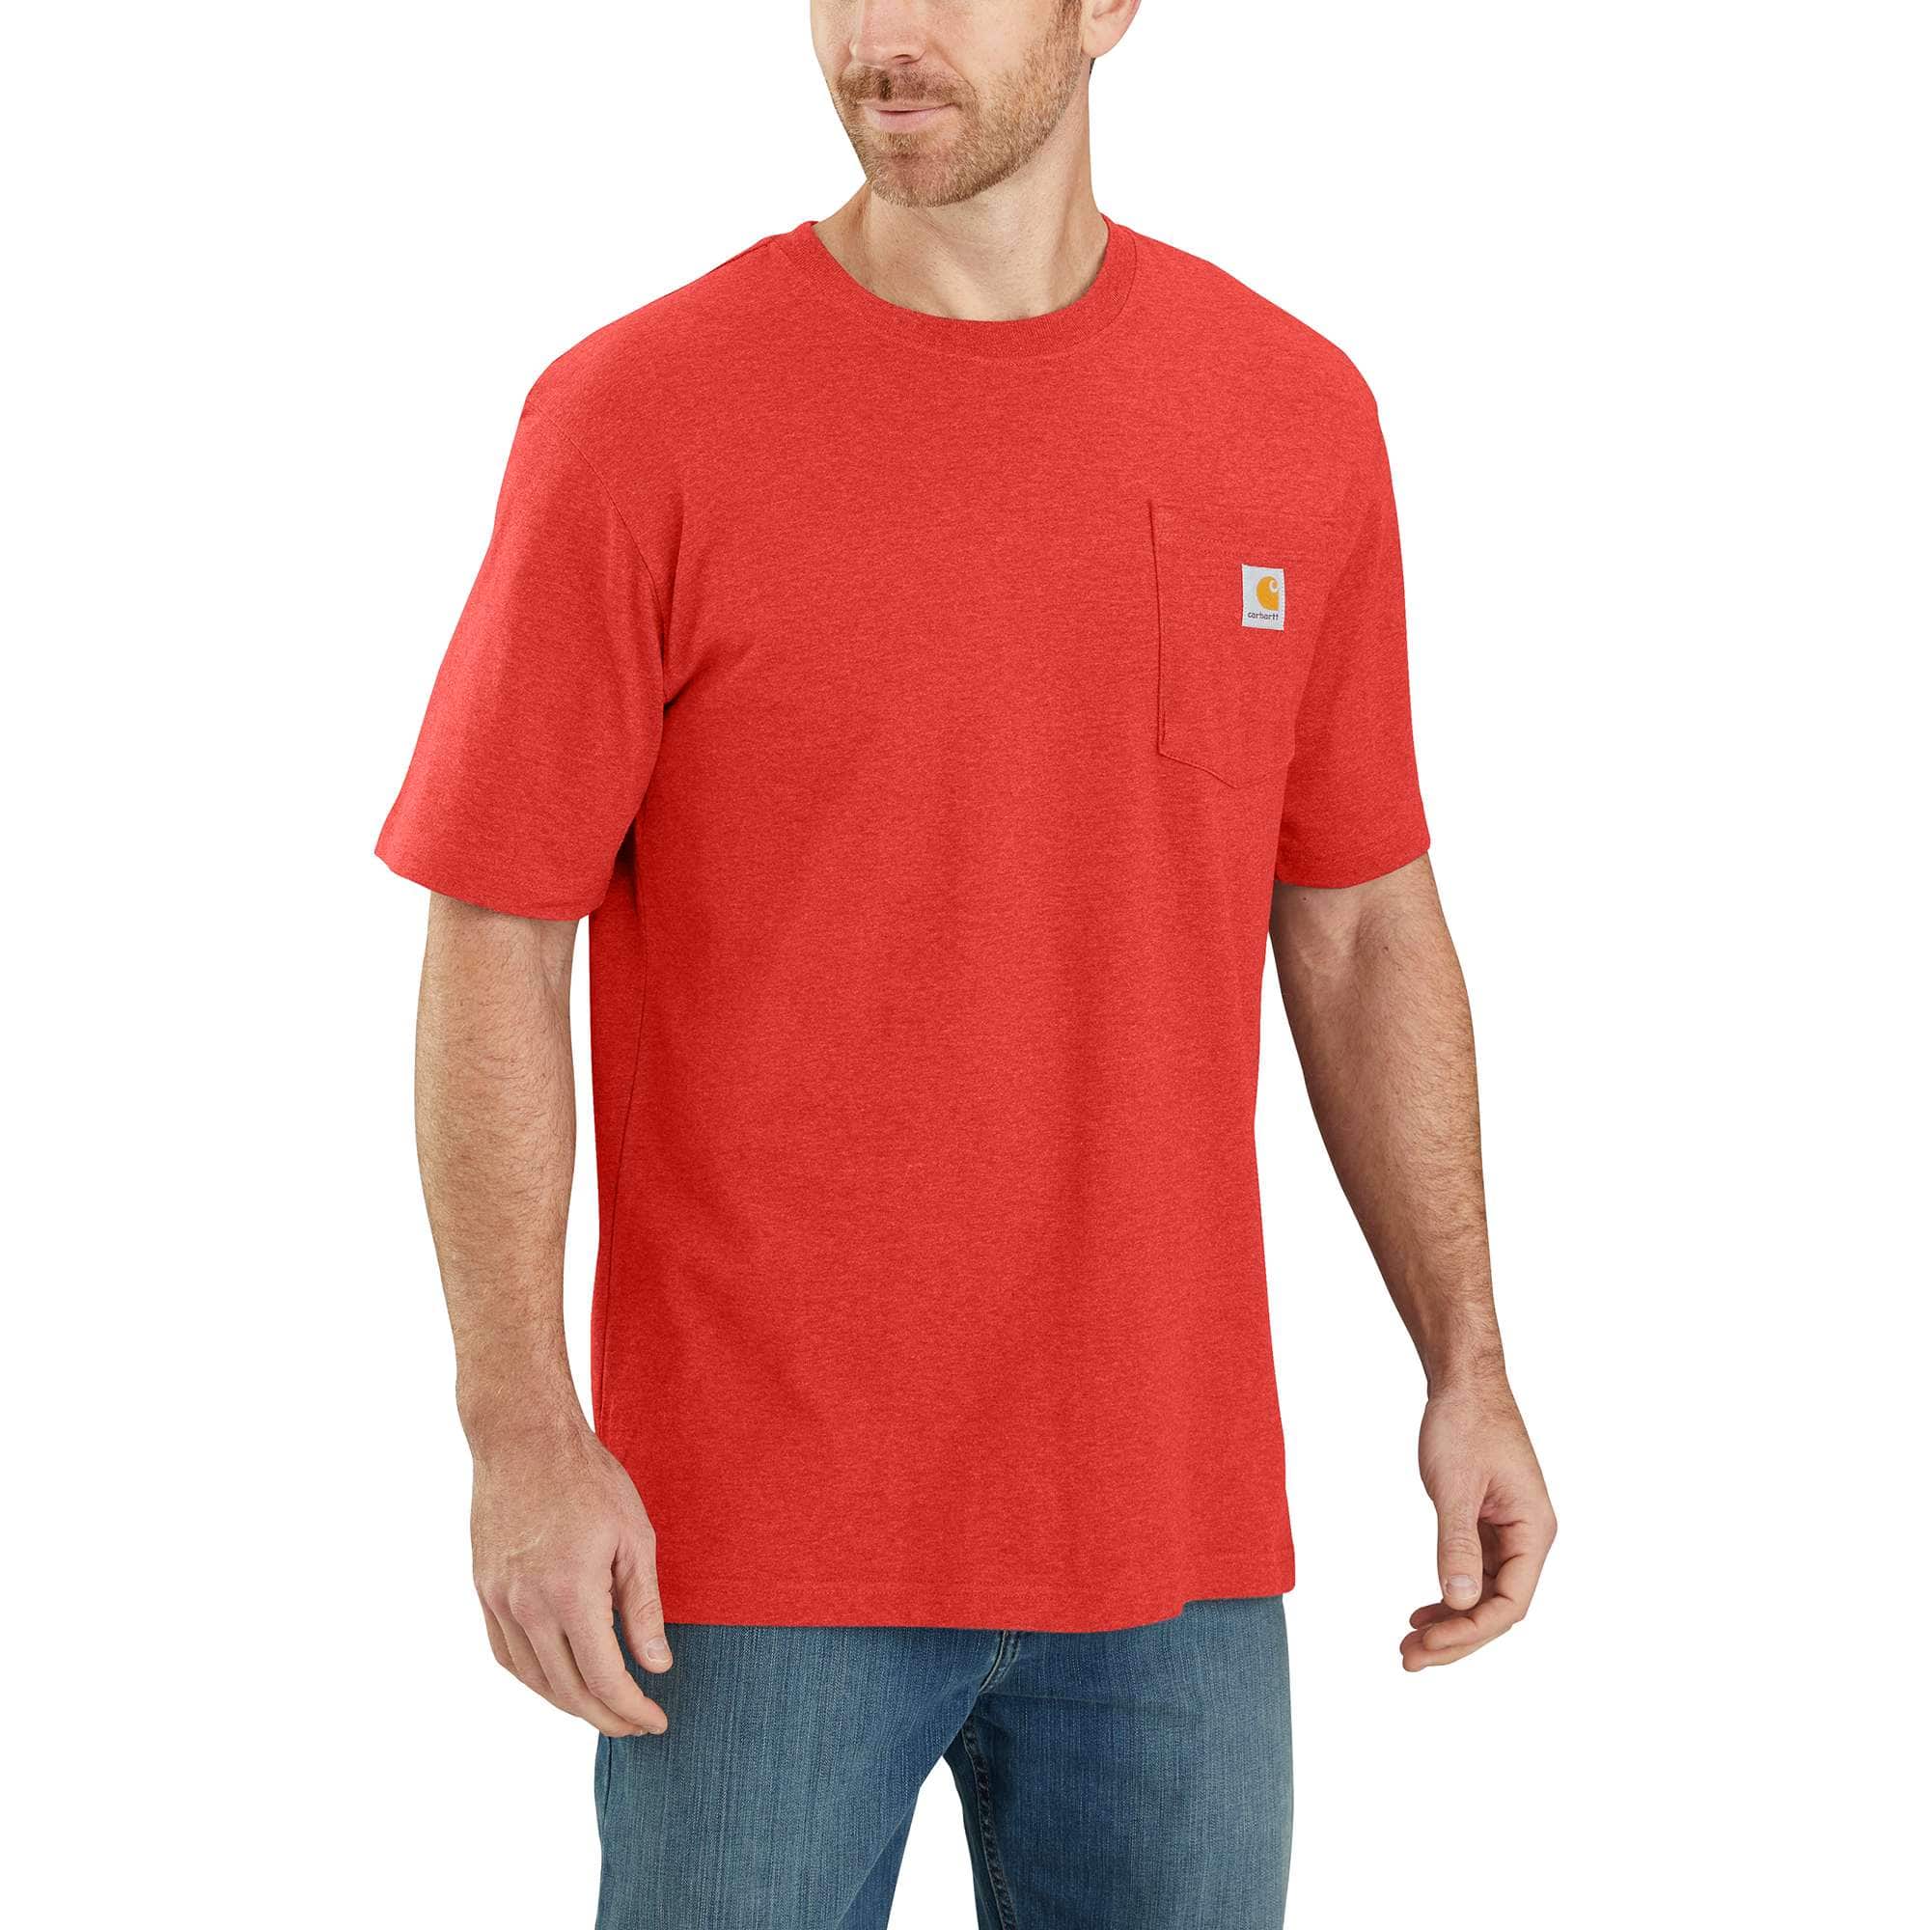 A Large Pocket Shirt For Your Giant Pocket Protector